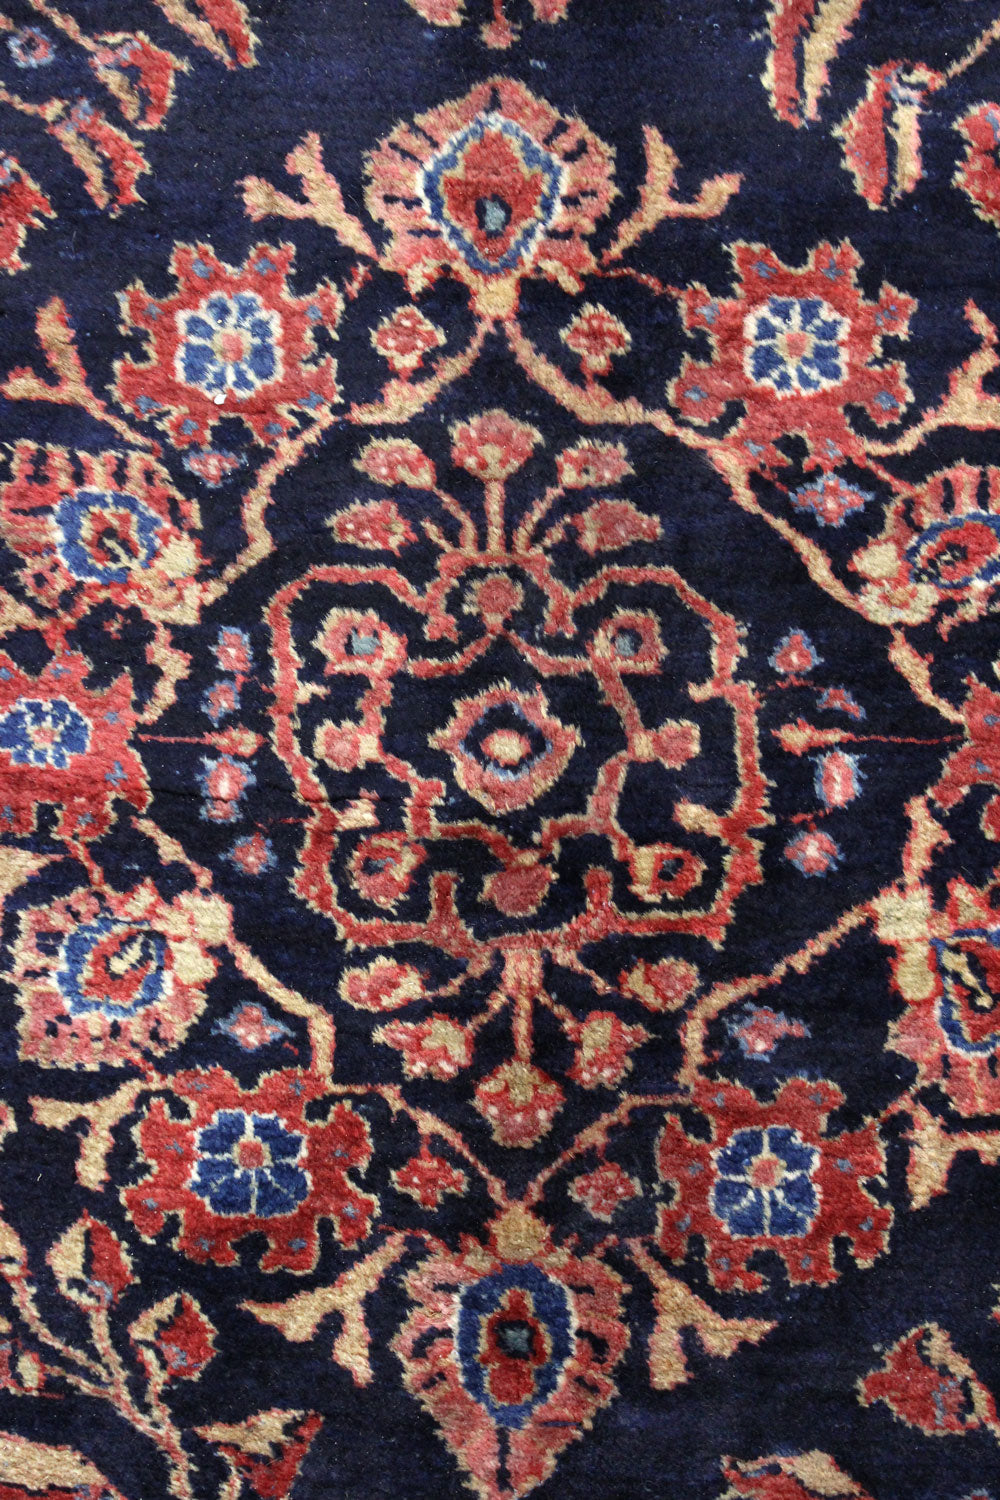 Antique Sarouk Handwoven Traditional Rug, JF8601